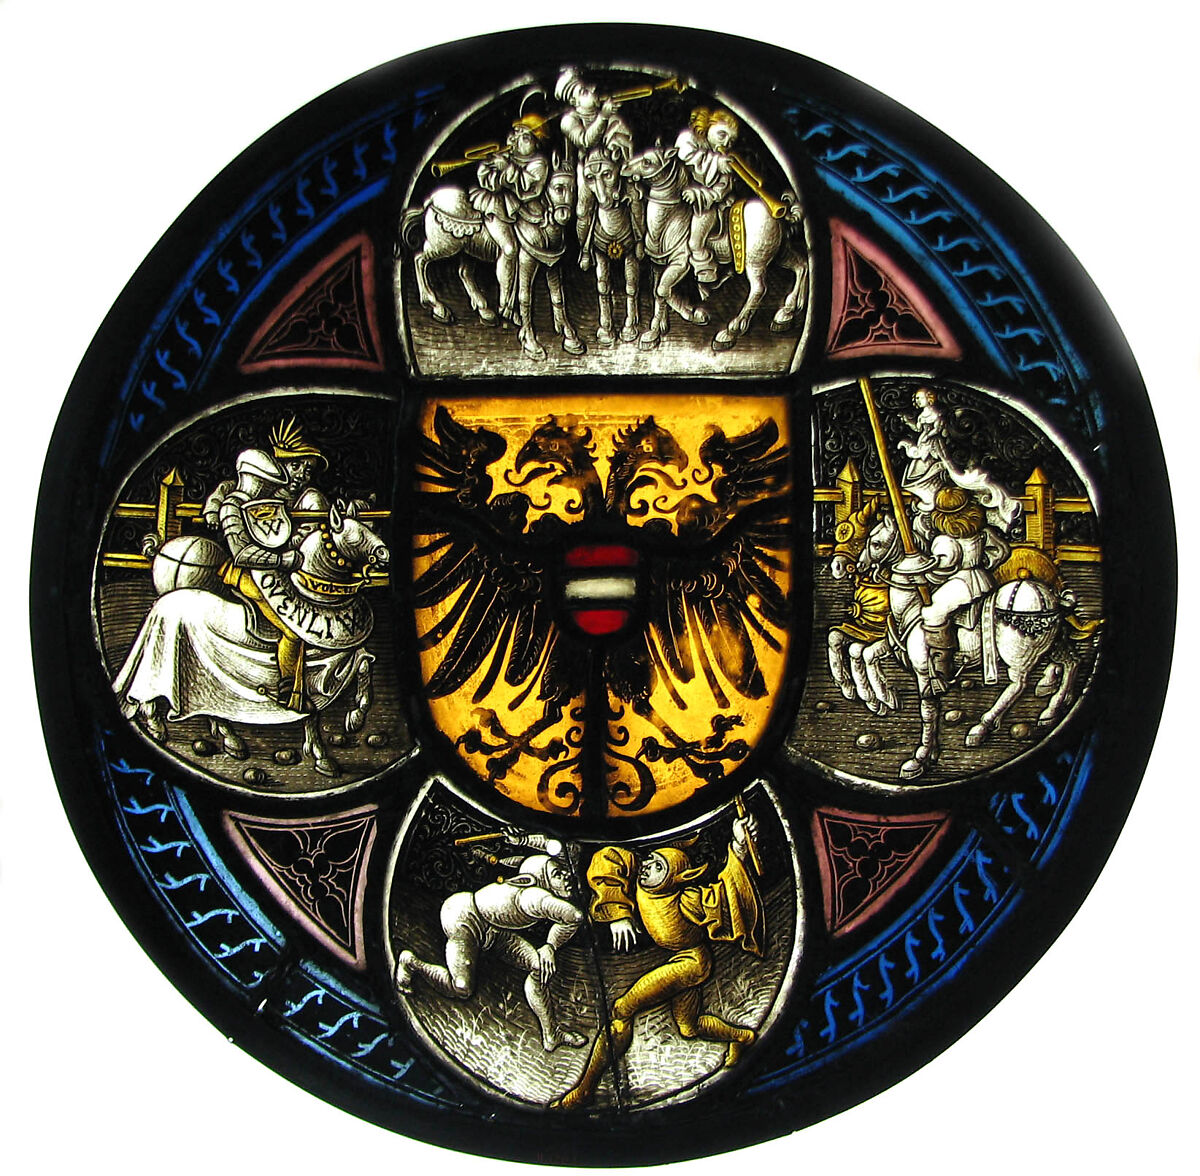 Quatrefoil Roundel with Arms and Secular Scenes, Pot-metal glass, white glass, vitreous paint, and silver stain, German